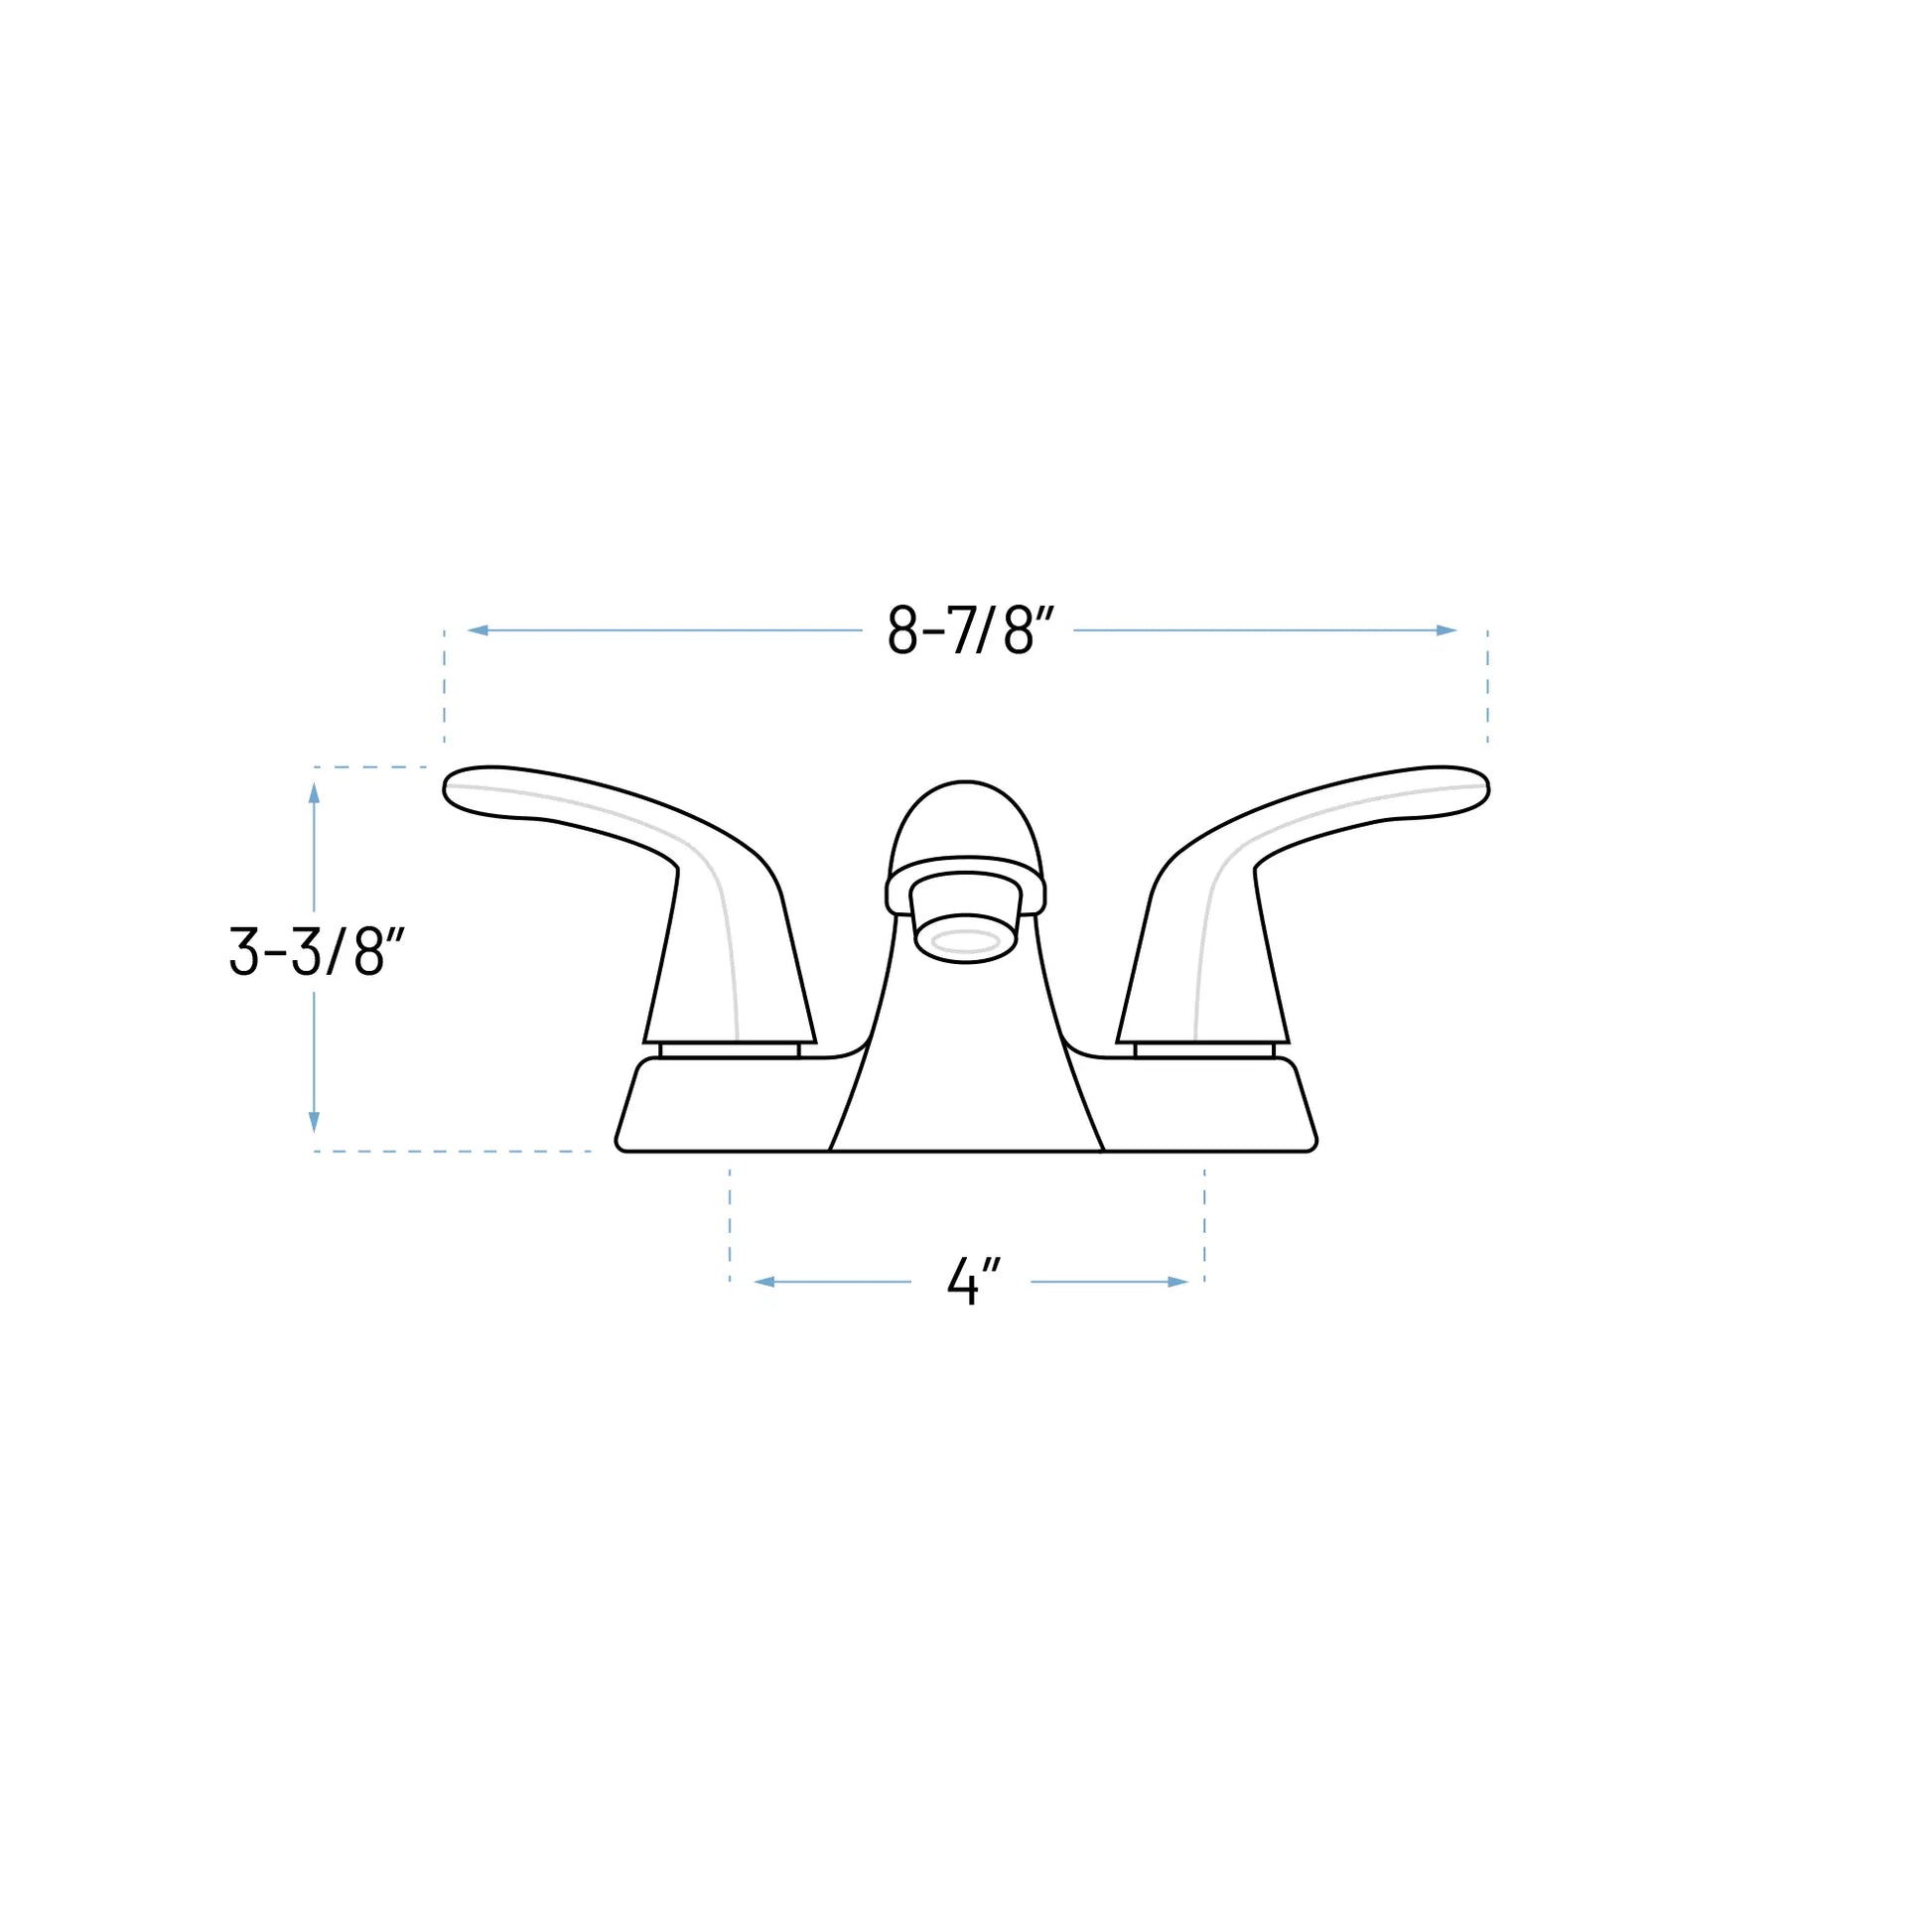 Technical drawing of a bathroom faucet